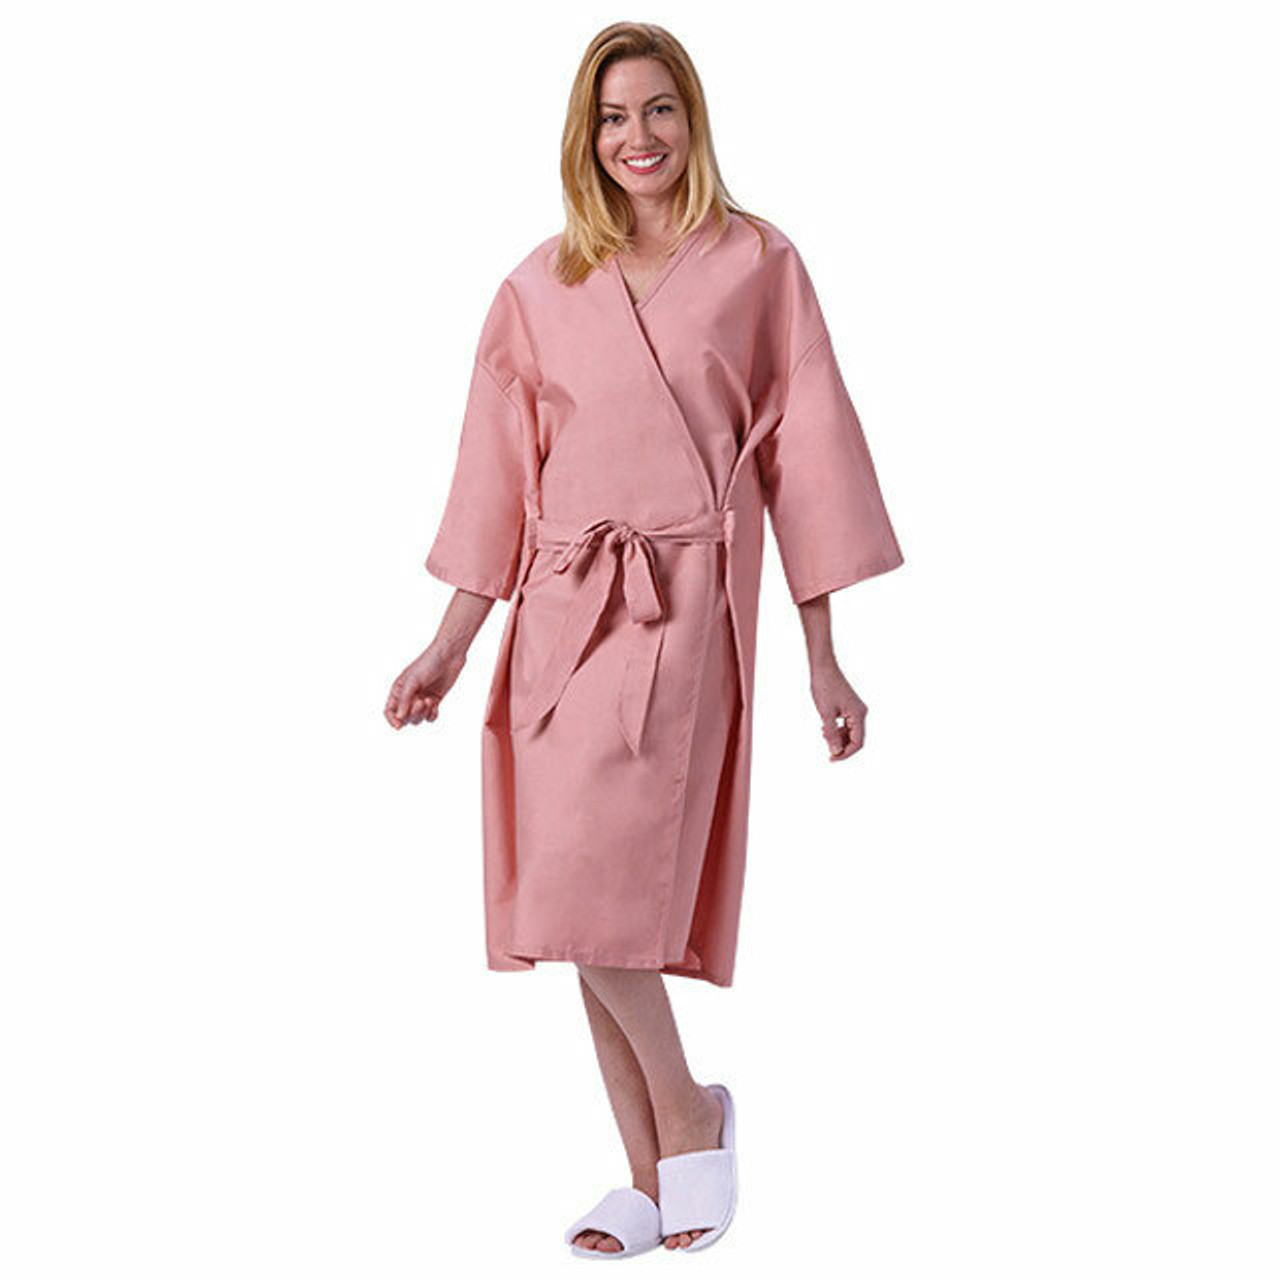 Hospital Patient Robes